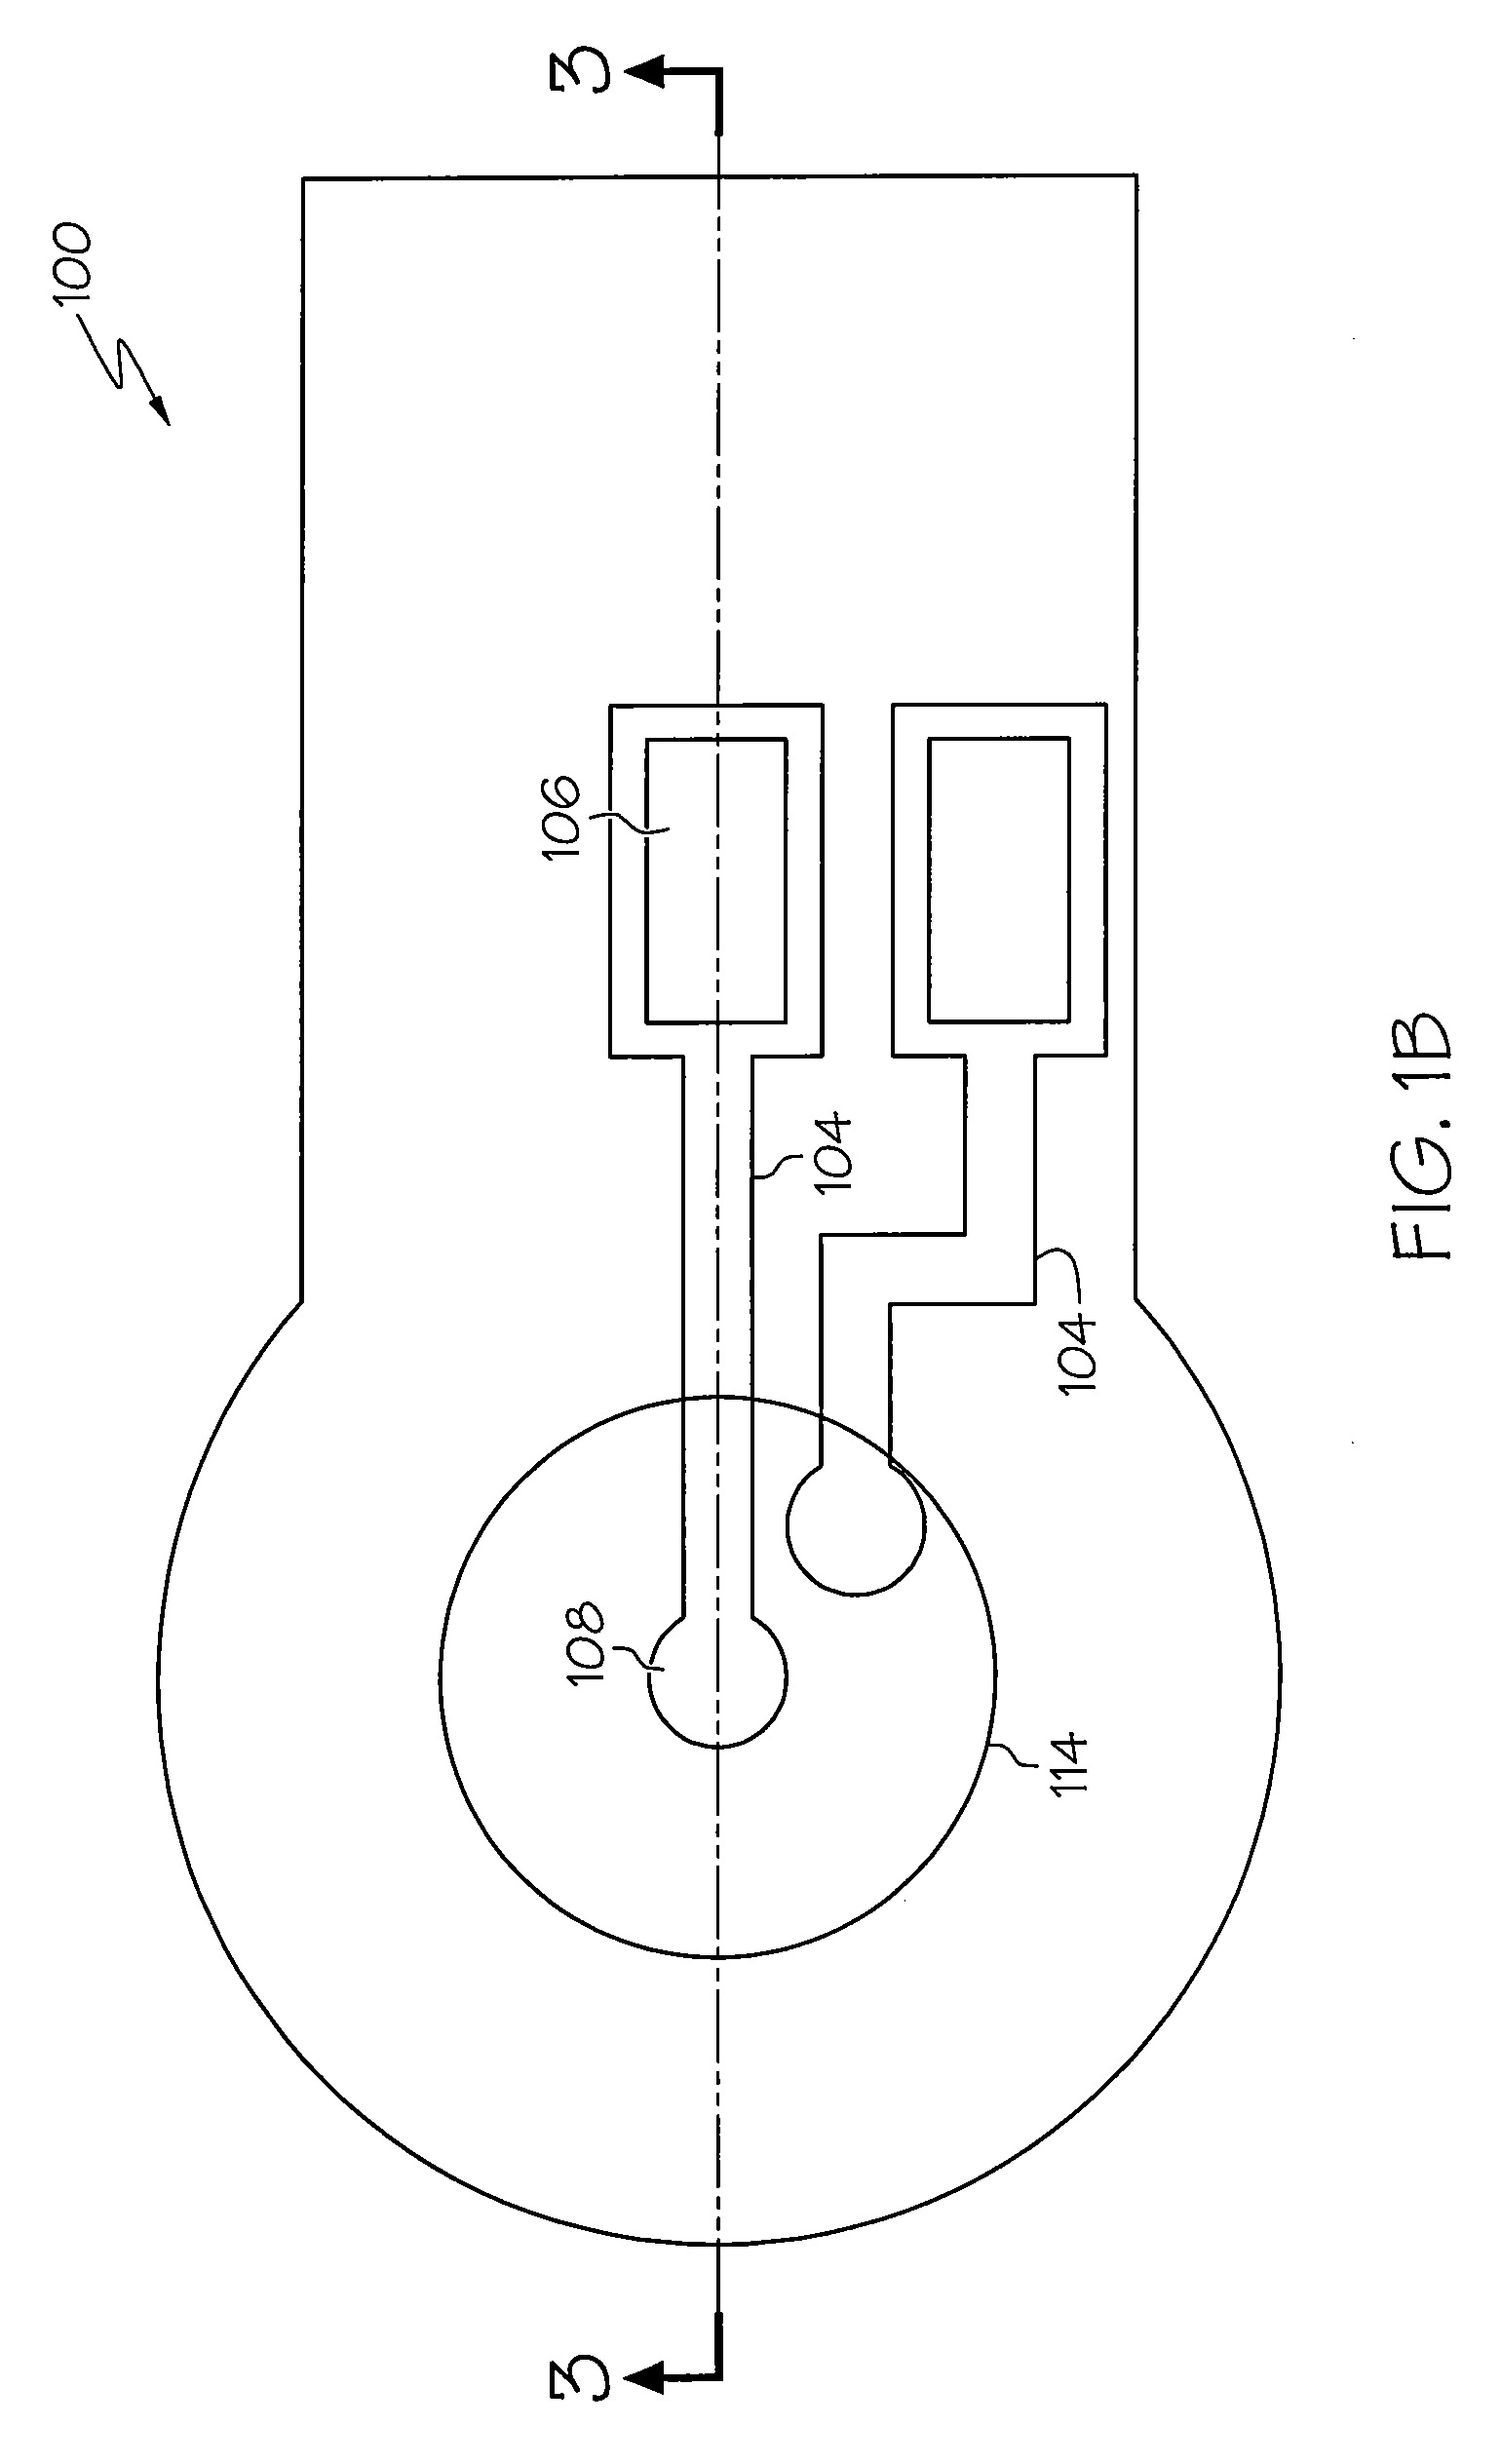 Structural health monitoring (SHM) transducer assembly and system